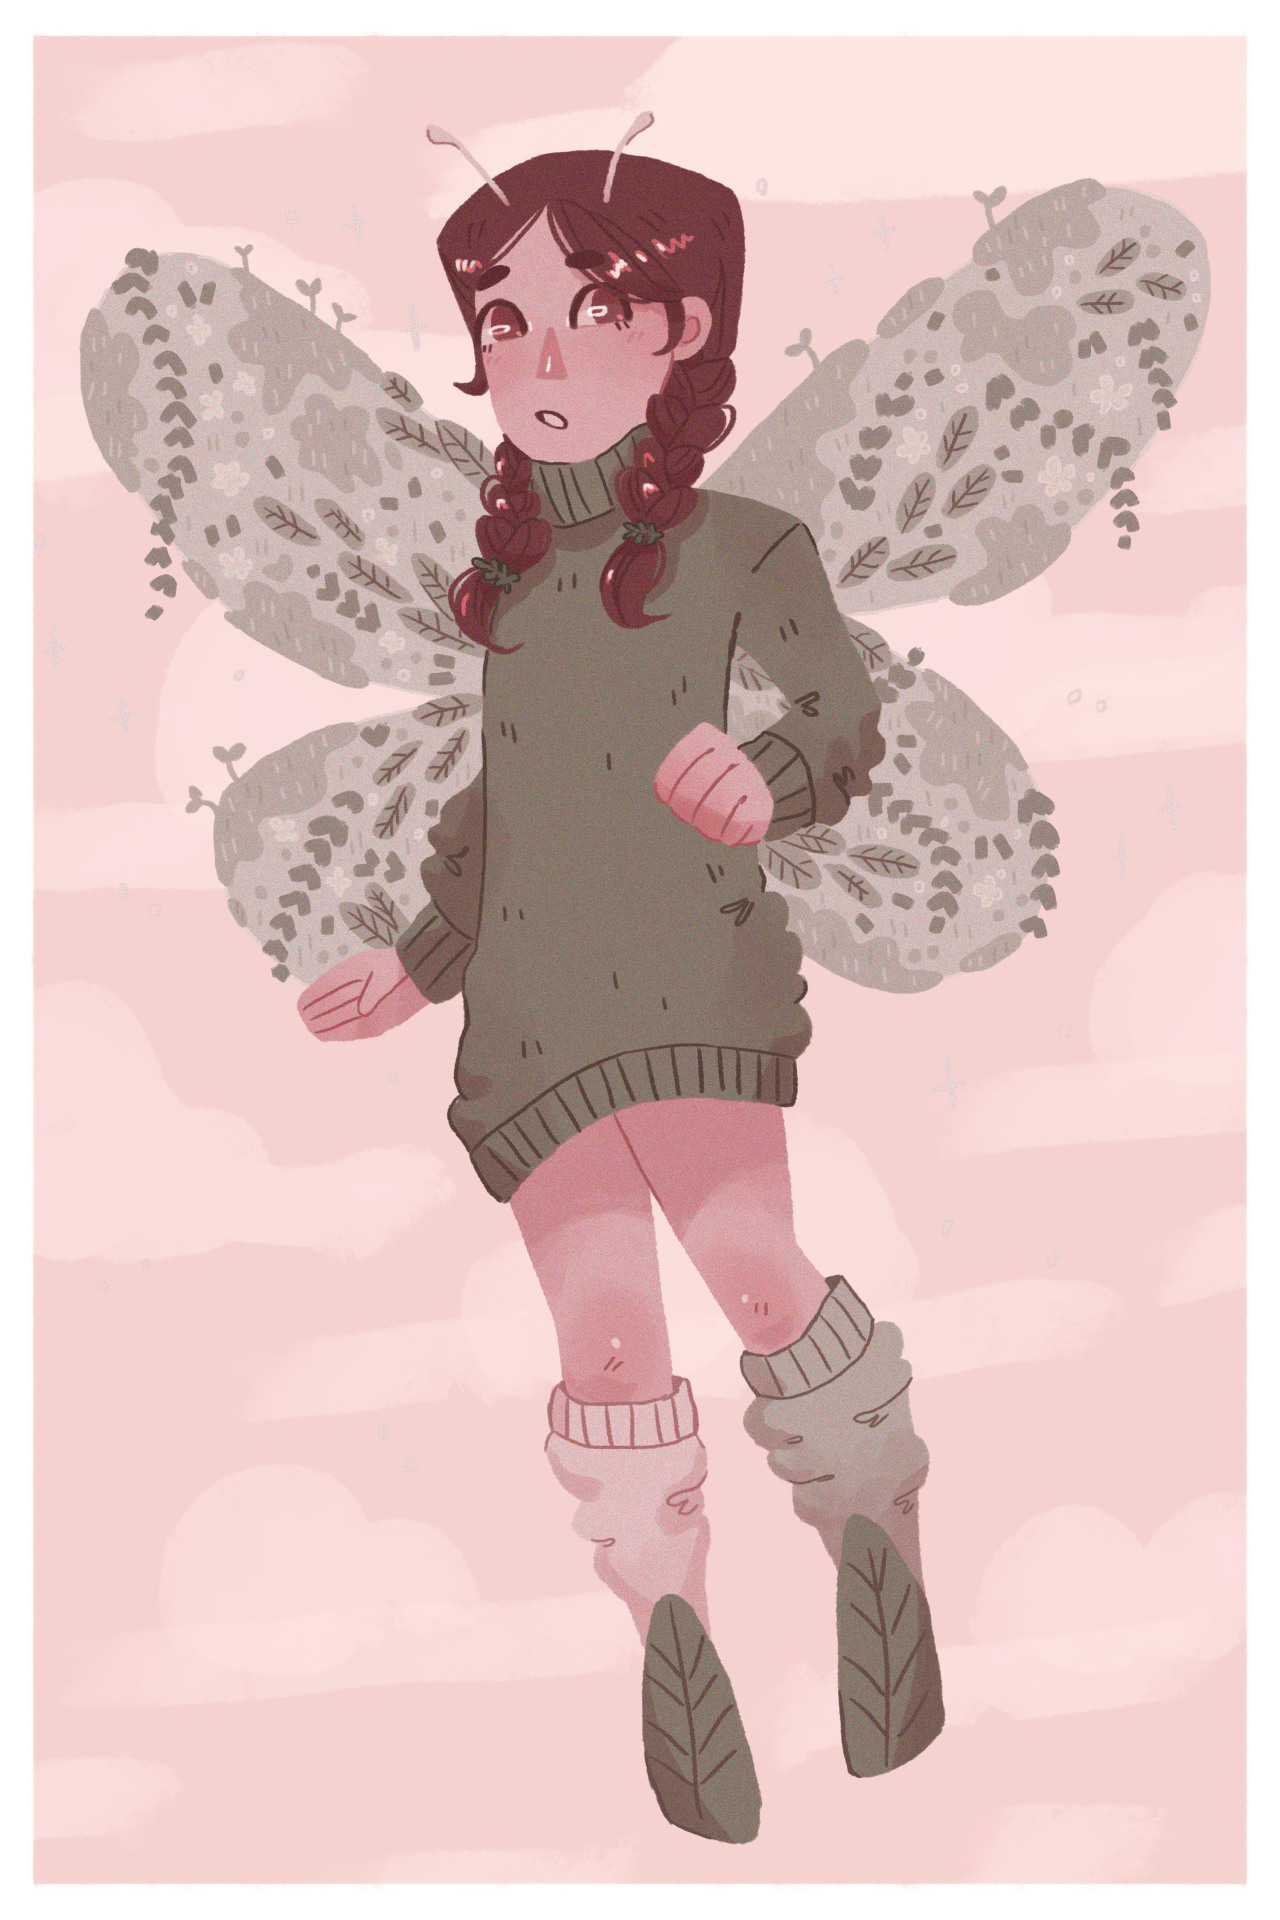 softpinkbee:
“ Faebruary Day 4: Moss
Just had to draw my gf for this one hehe